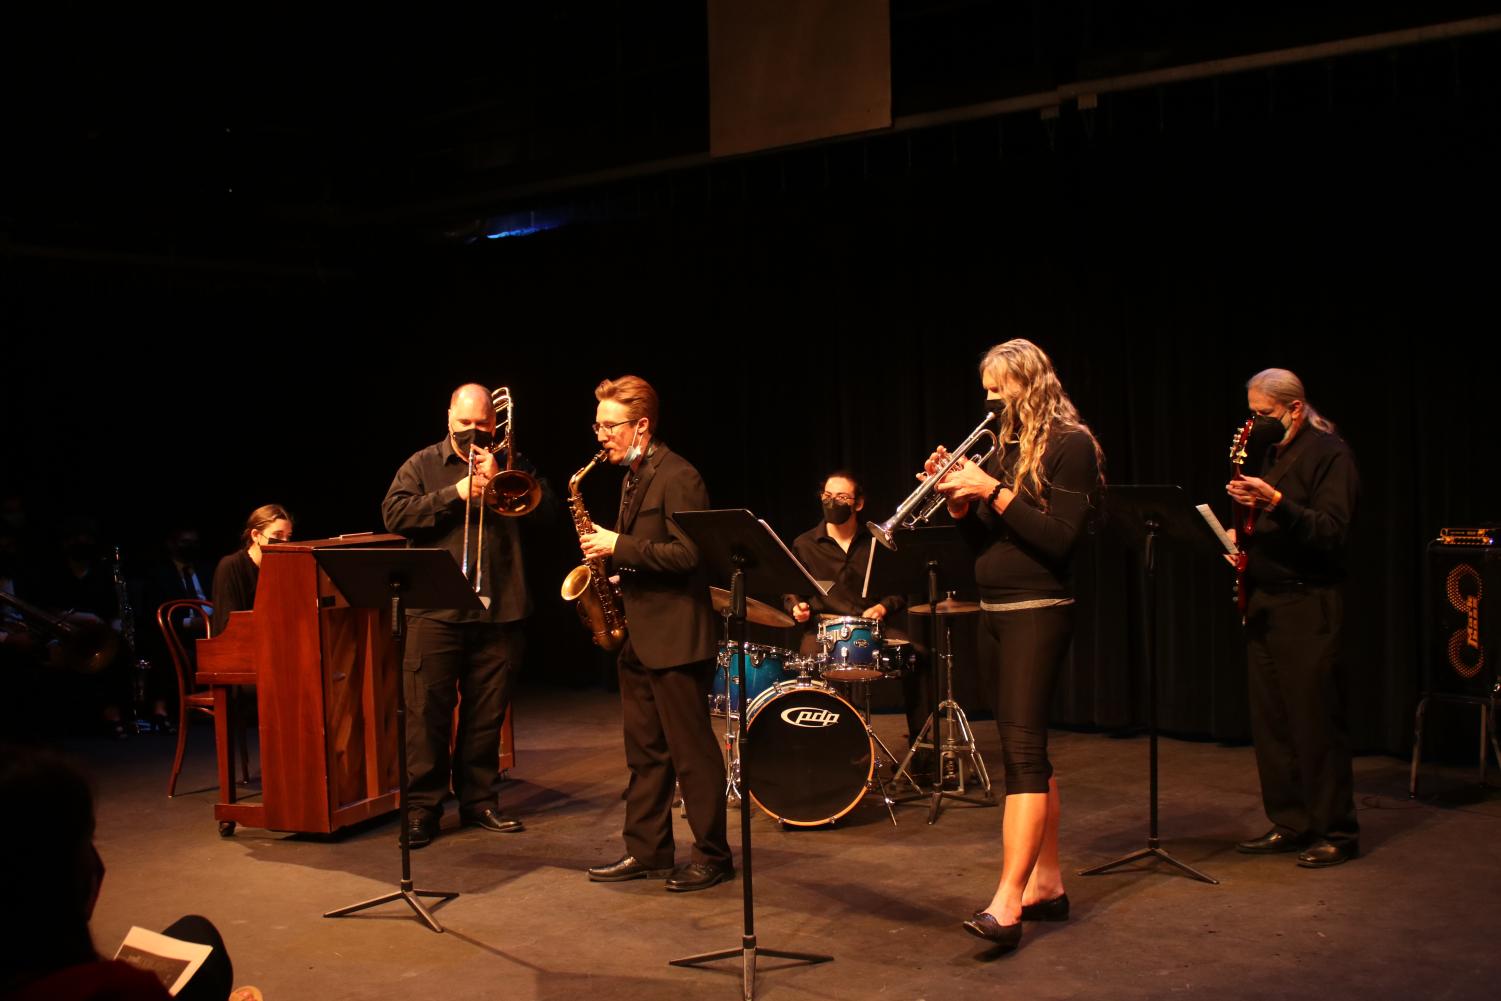 Musicians perform in the Performing Arts Center during the "Intimate Evening of Music" on April 9. 2022 in Moorpark, CA. (From left to right: Kara Zacarro, Brendan McMullin, Roy Bletscher, Roman Perez, Kerri Galgas, Mark Kamradt)